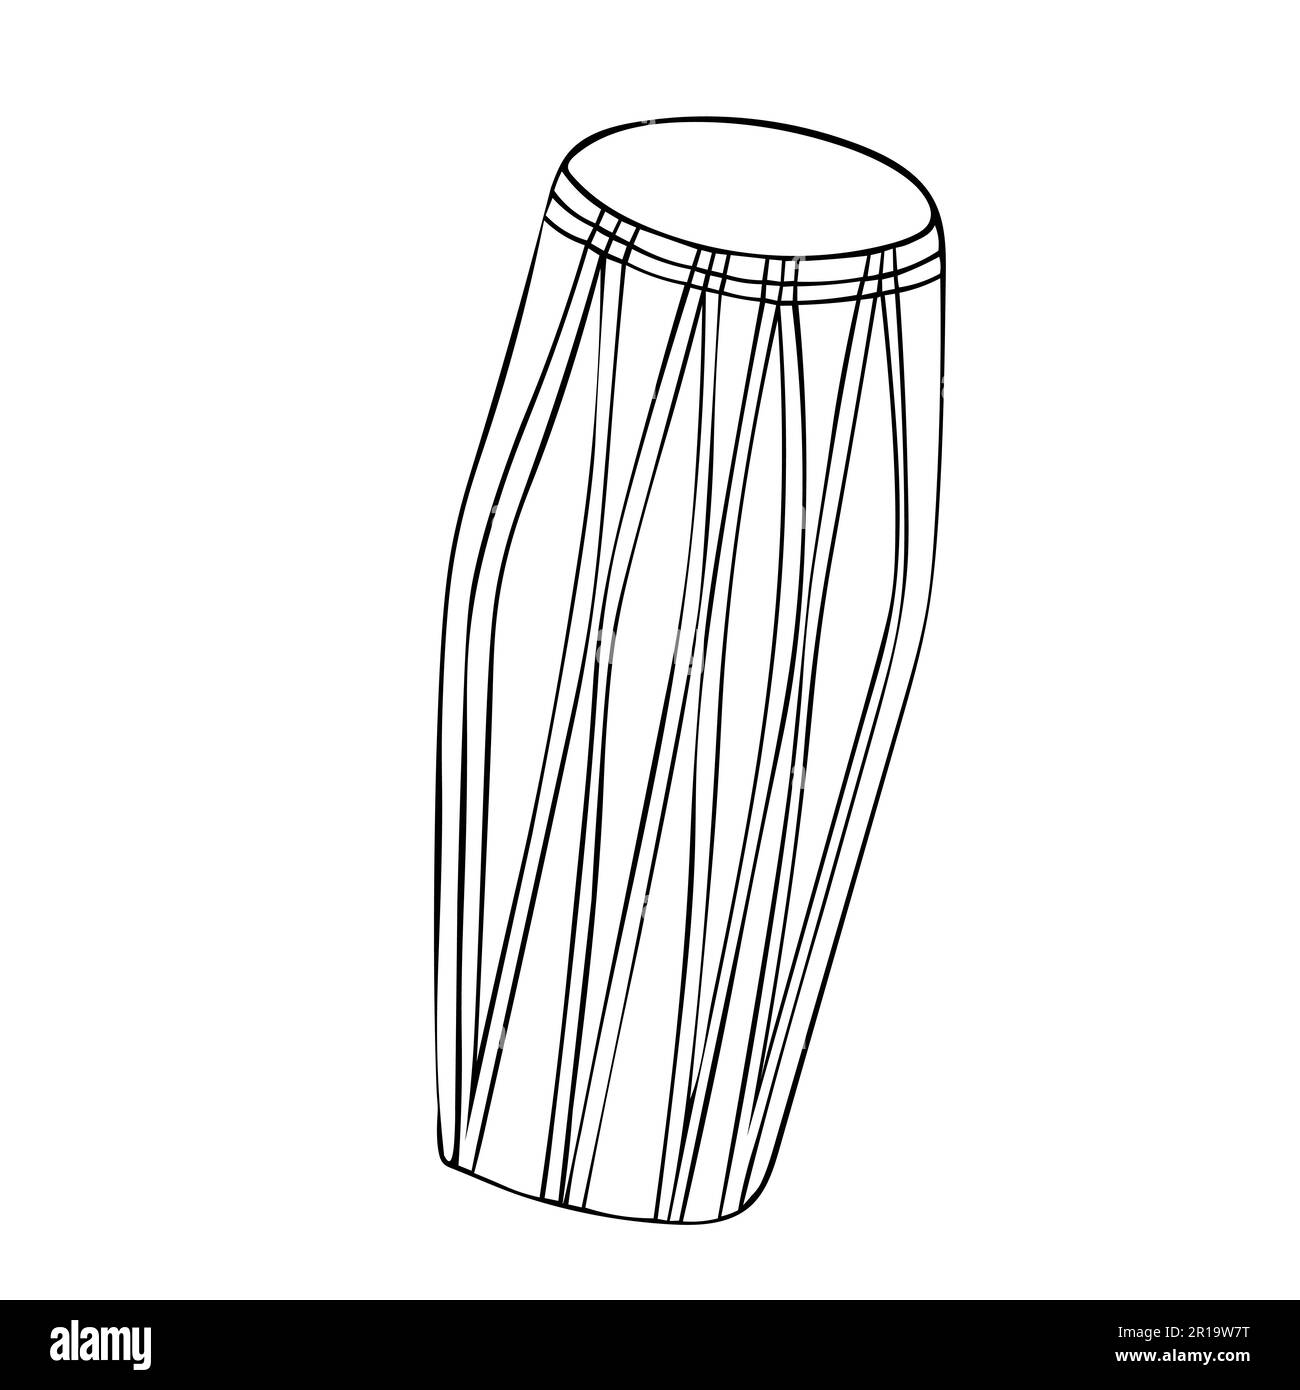 Vector illustration of mrdanga indian two-sided drum khol played with palms and fingers of both hands. Stock Vector